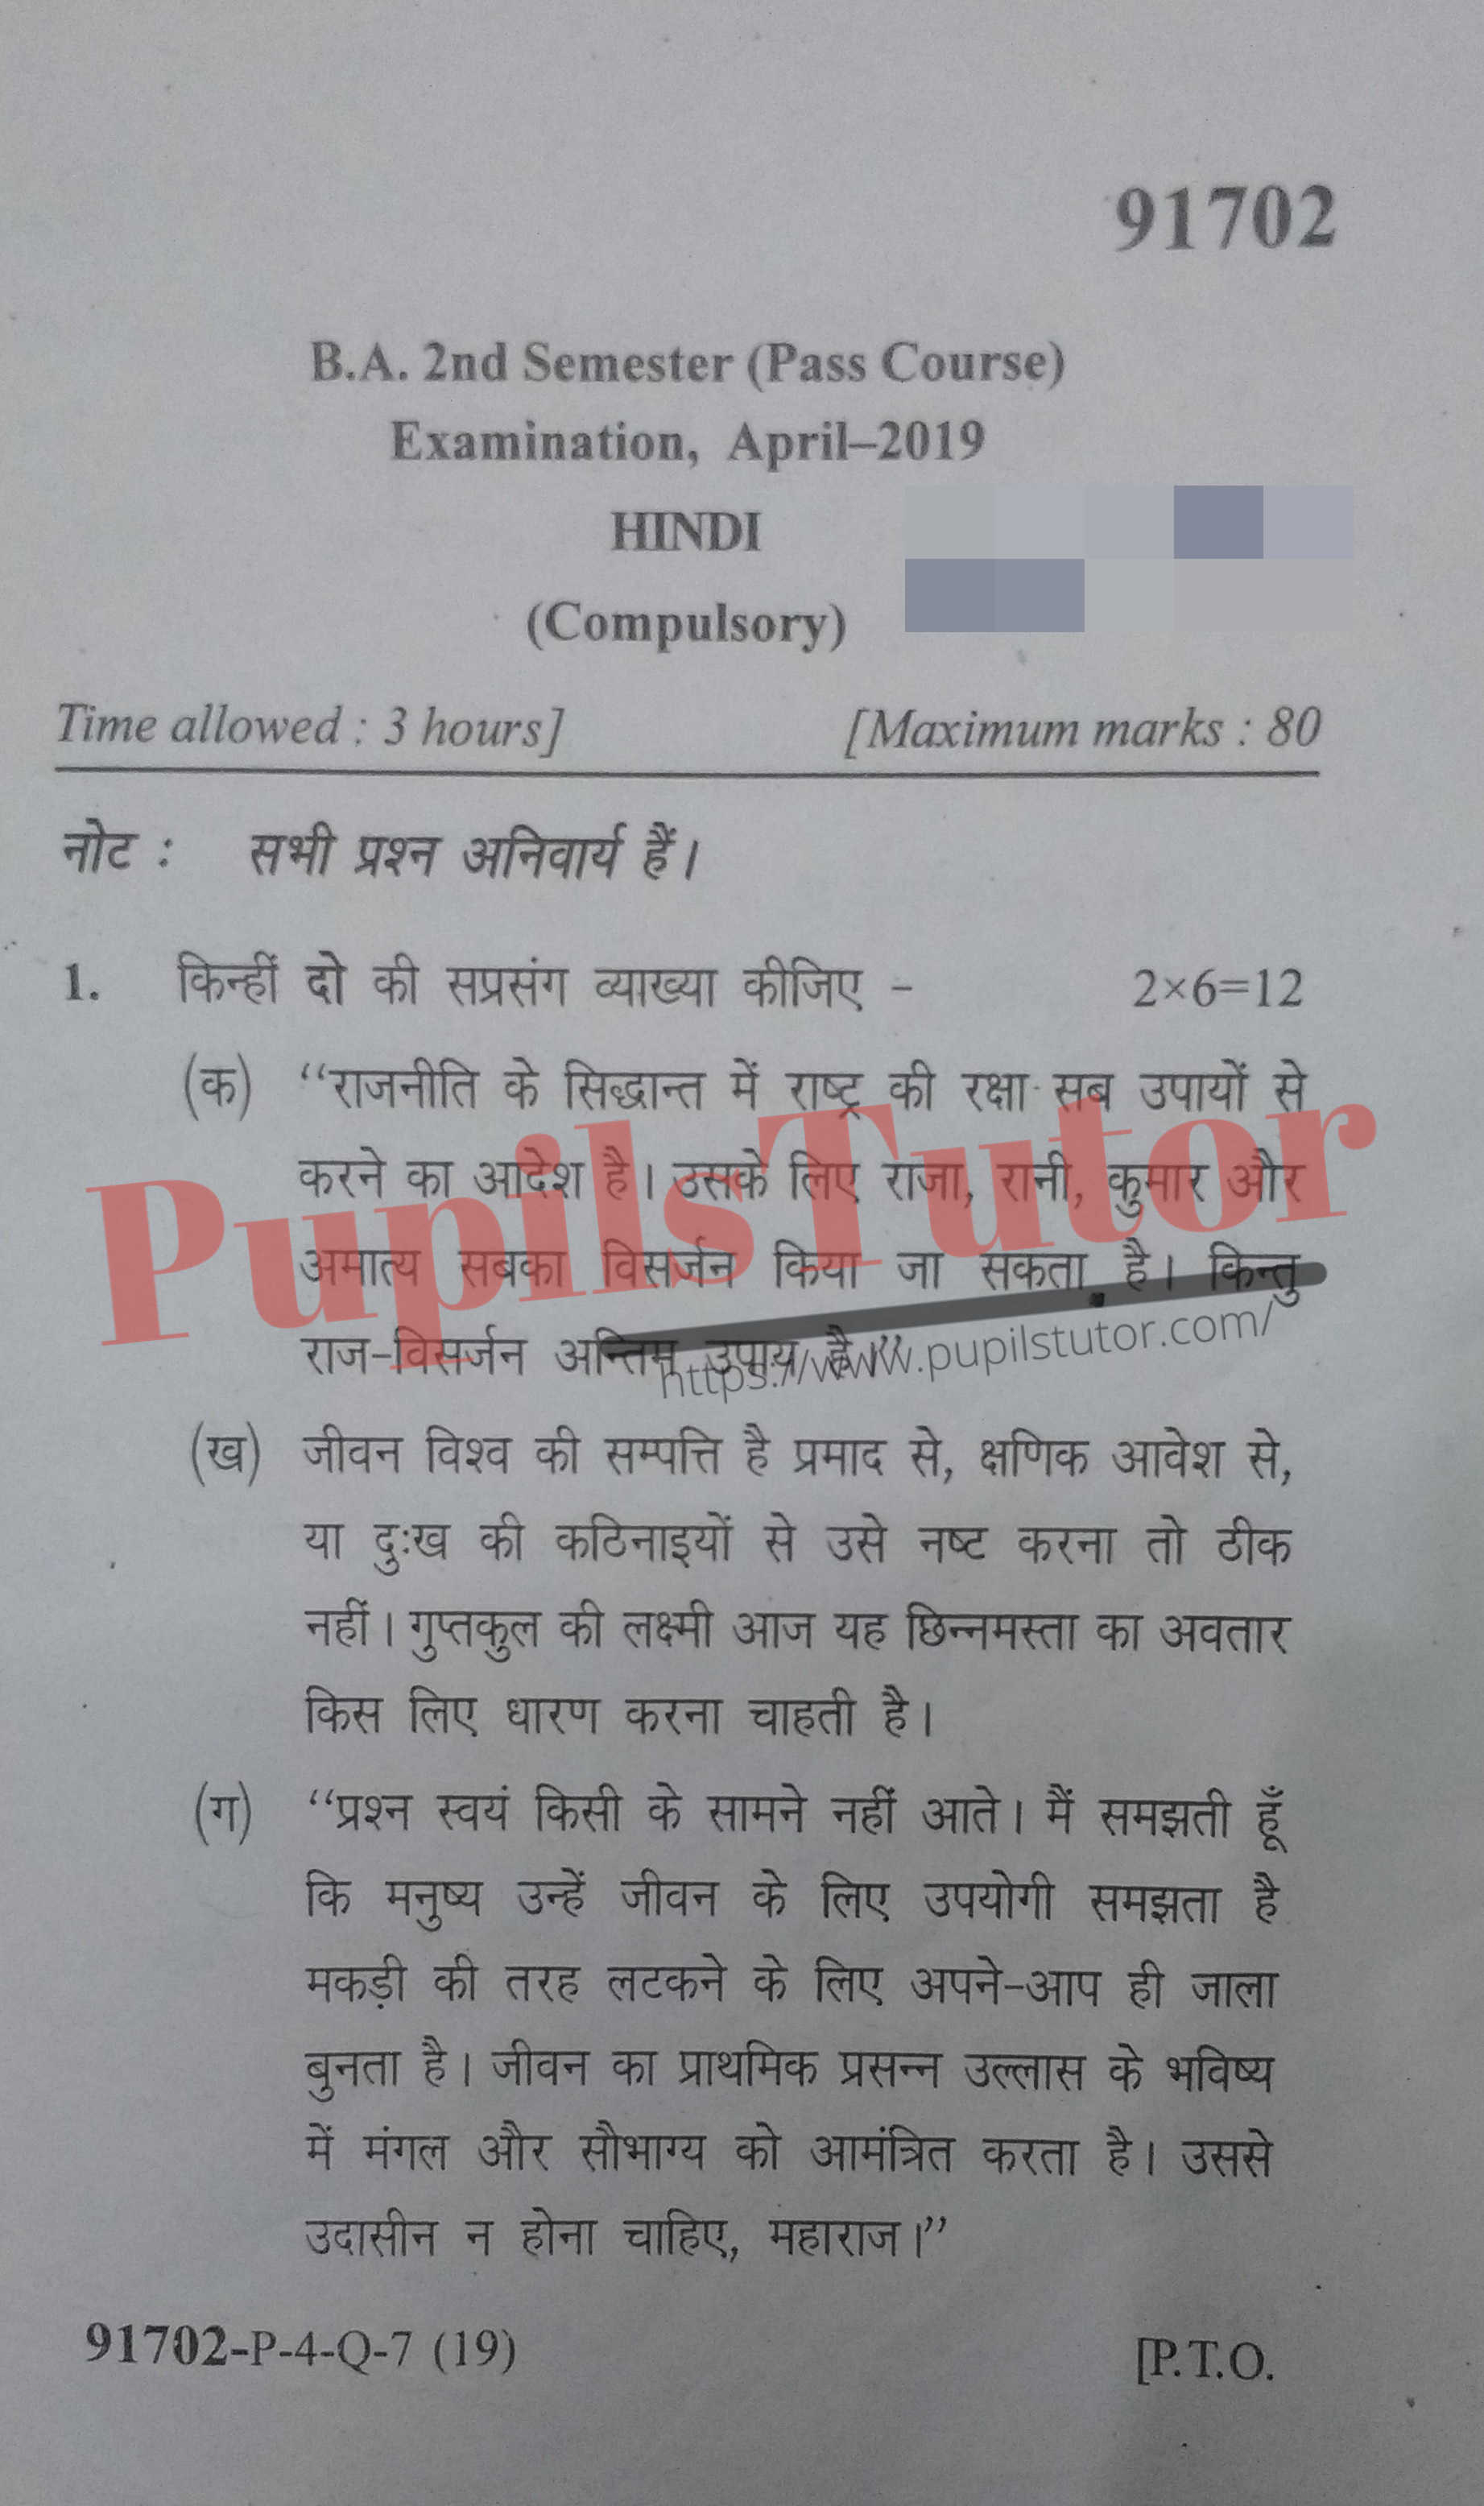 MDU (Maharshi Dayanand University, Rohtak Haryana) BA Pass Course Second Semester Previous Year Hindi Question Paper For April, 2019 Exam (Question Paper Page 1) - pupilstutor.com